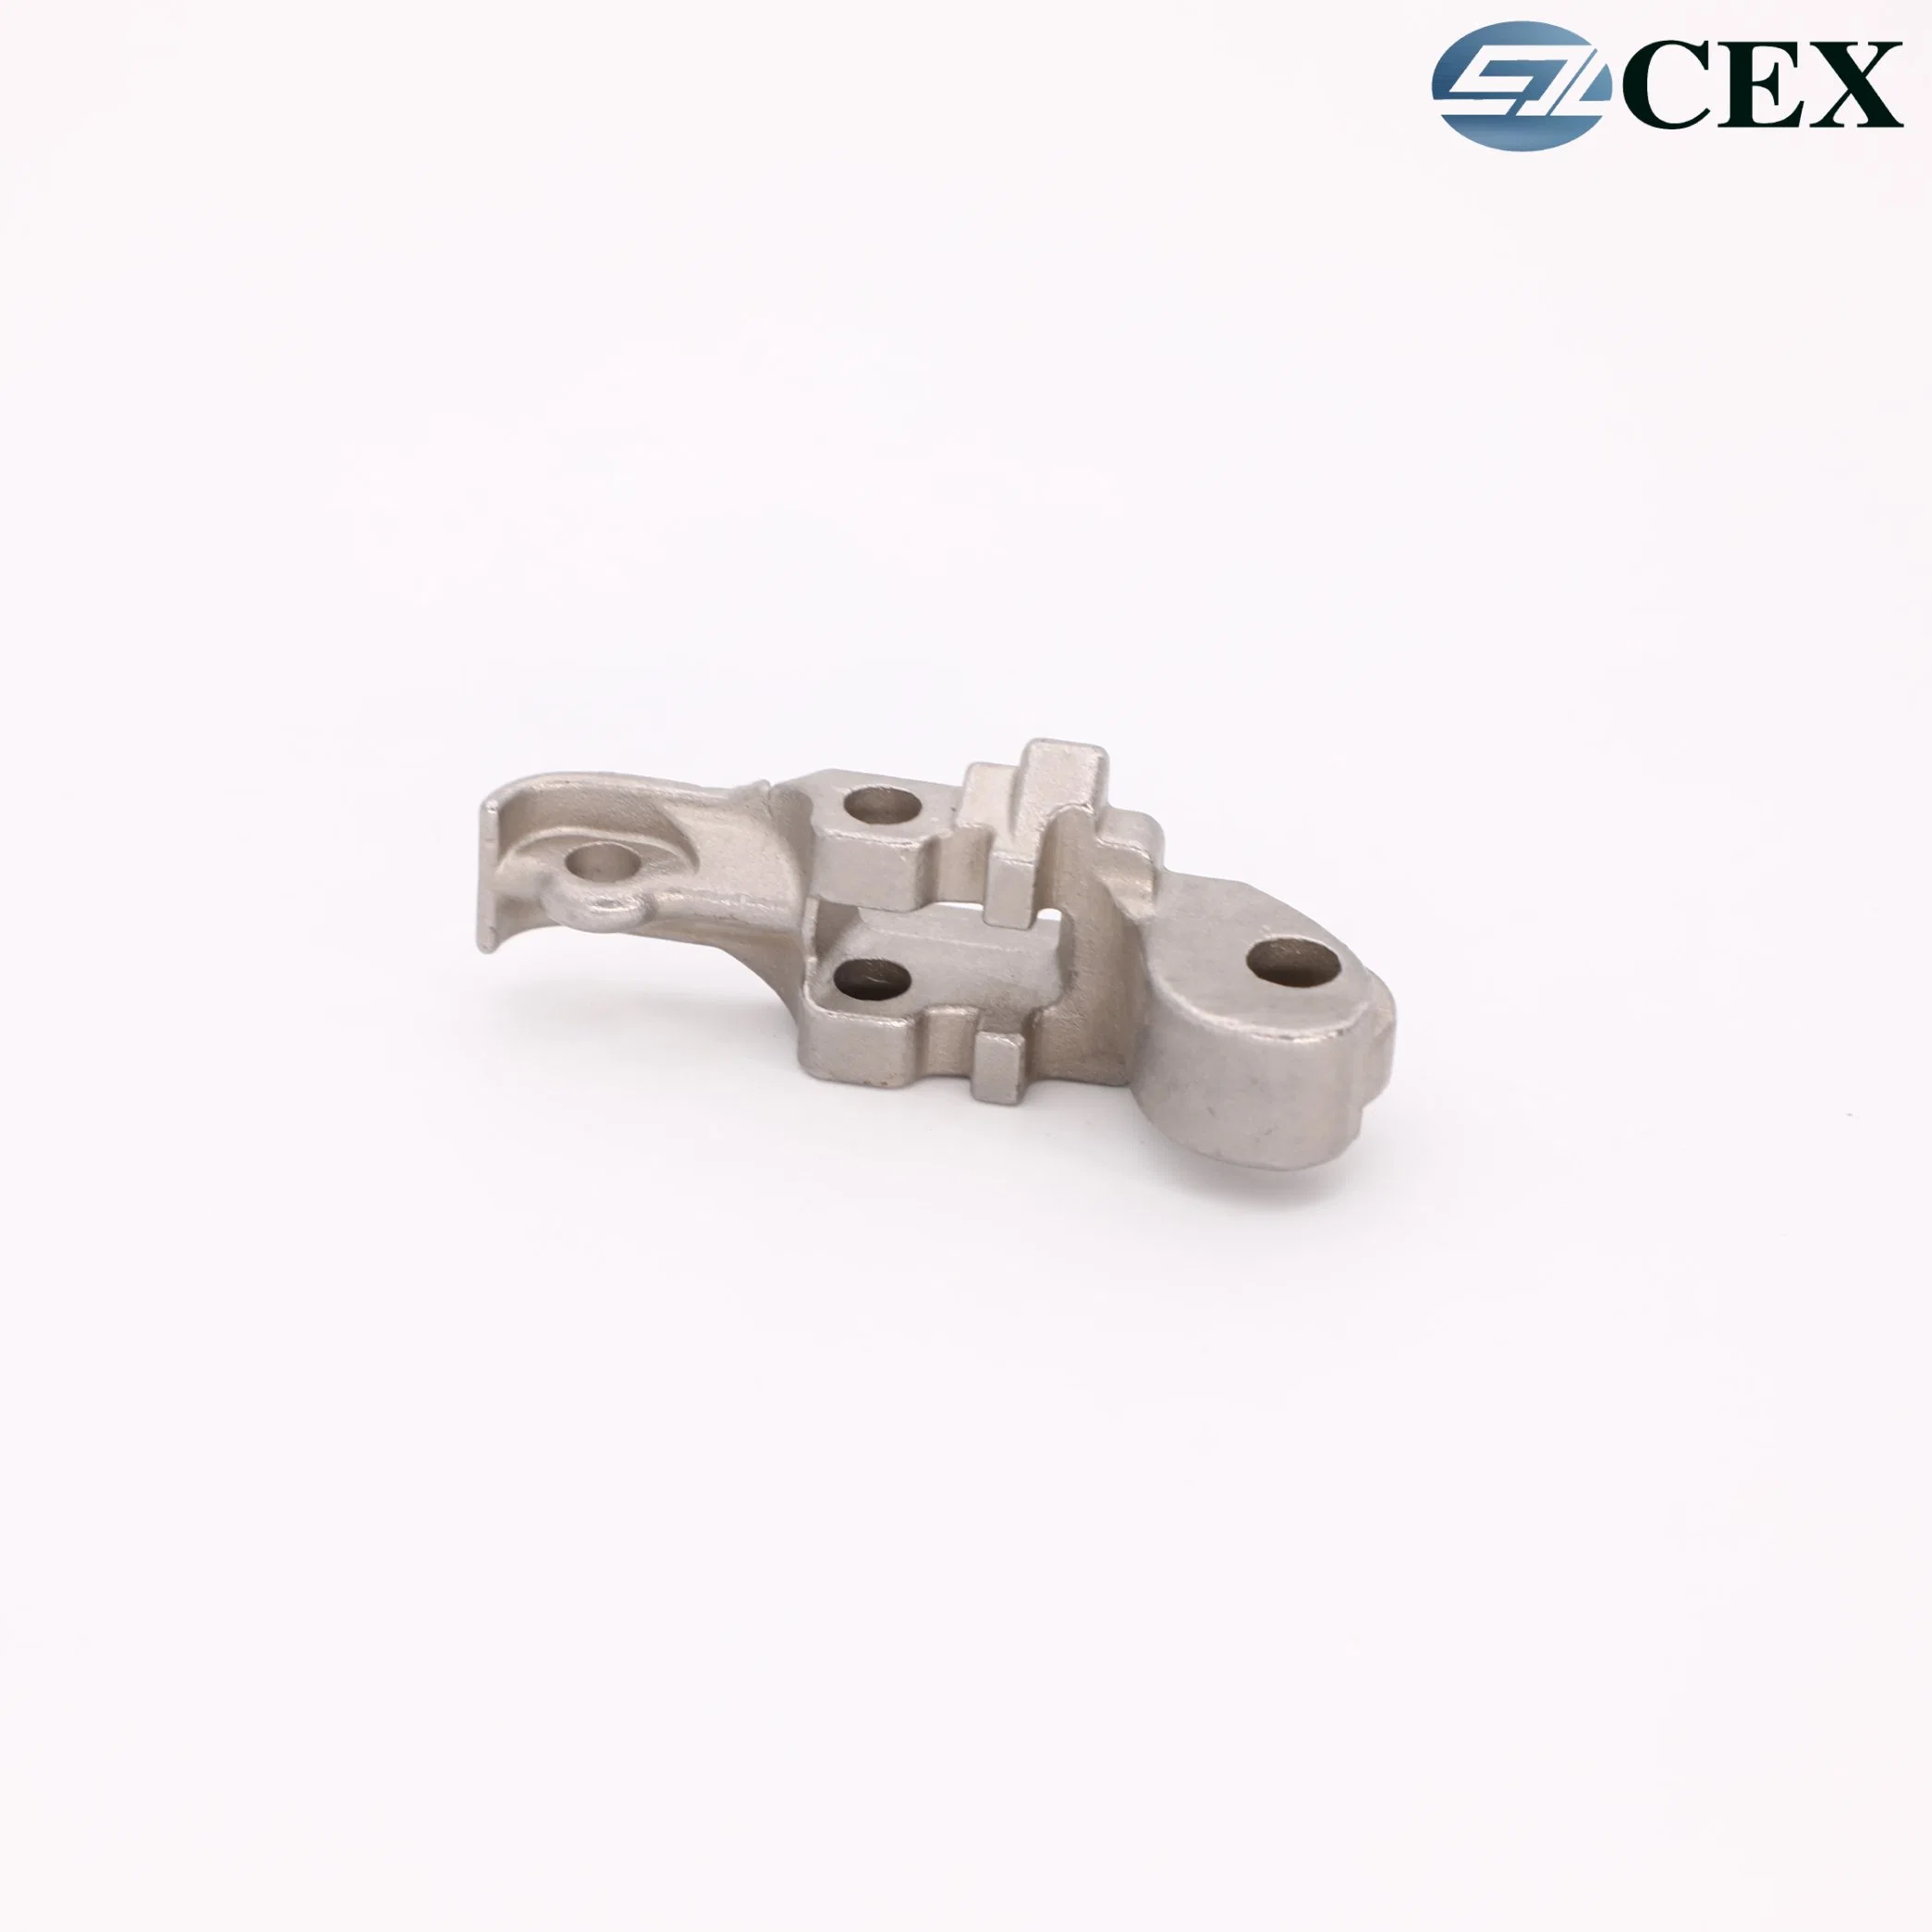 Home Appliances Used Designed High Density Performance Die Casting Aluminum Alloy Pot/ Pan